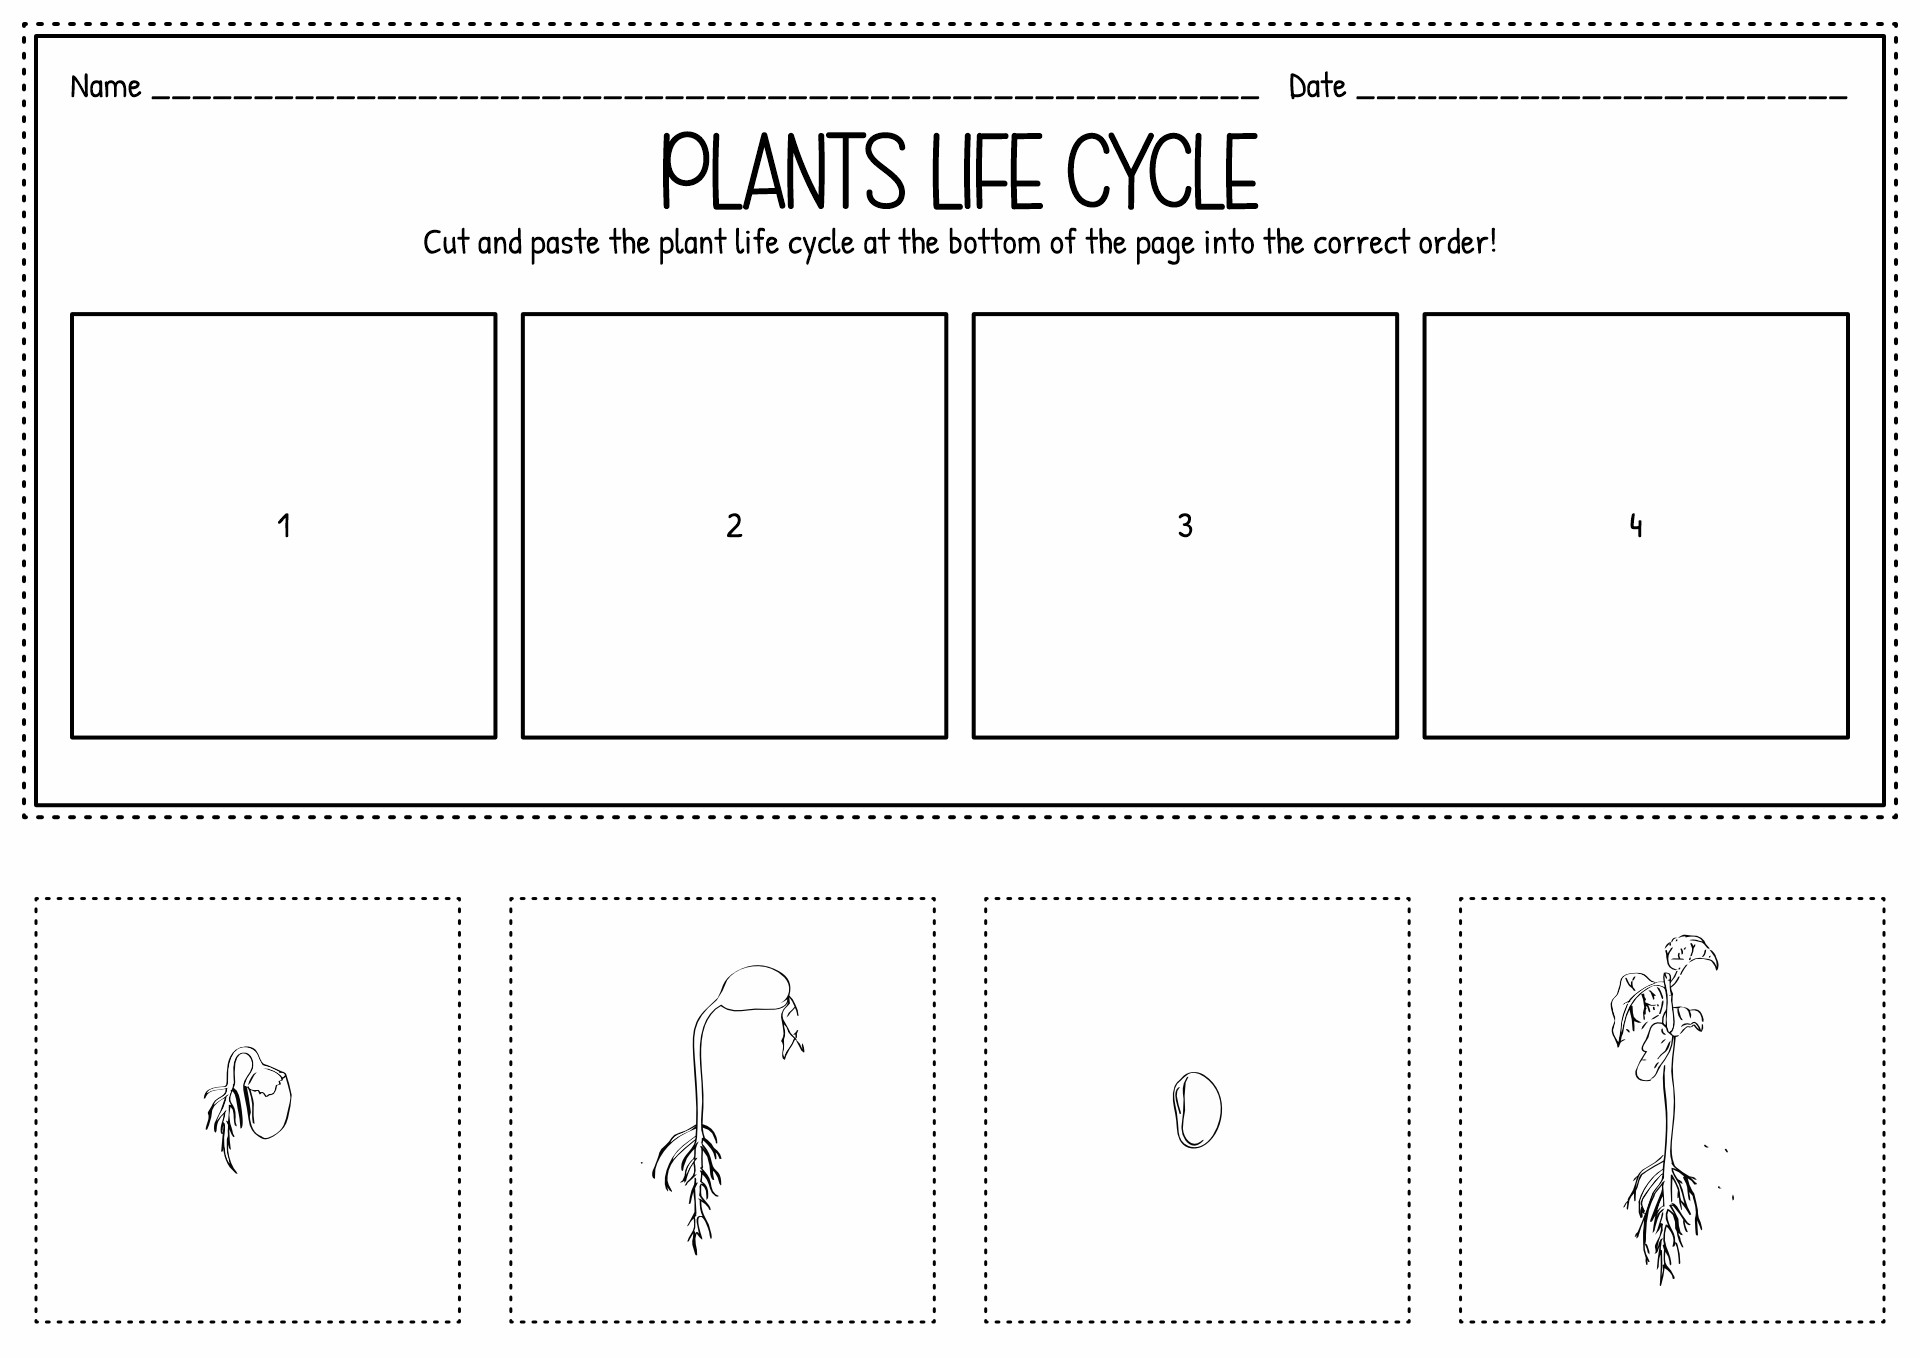 Plant Life Cycle Cut and Paste